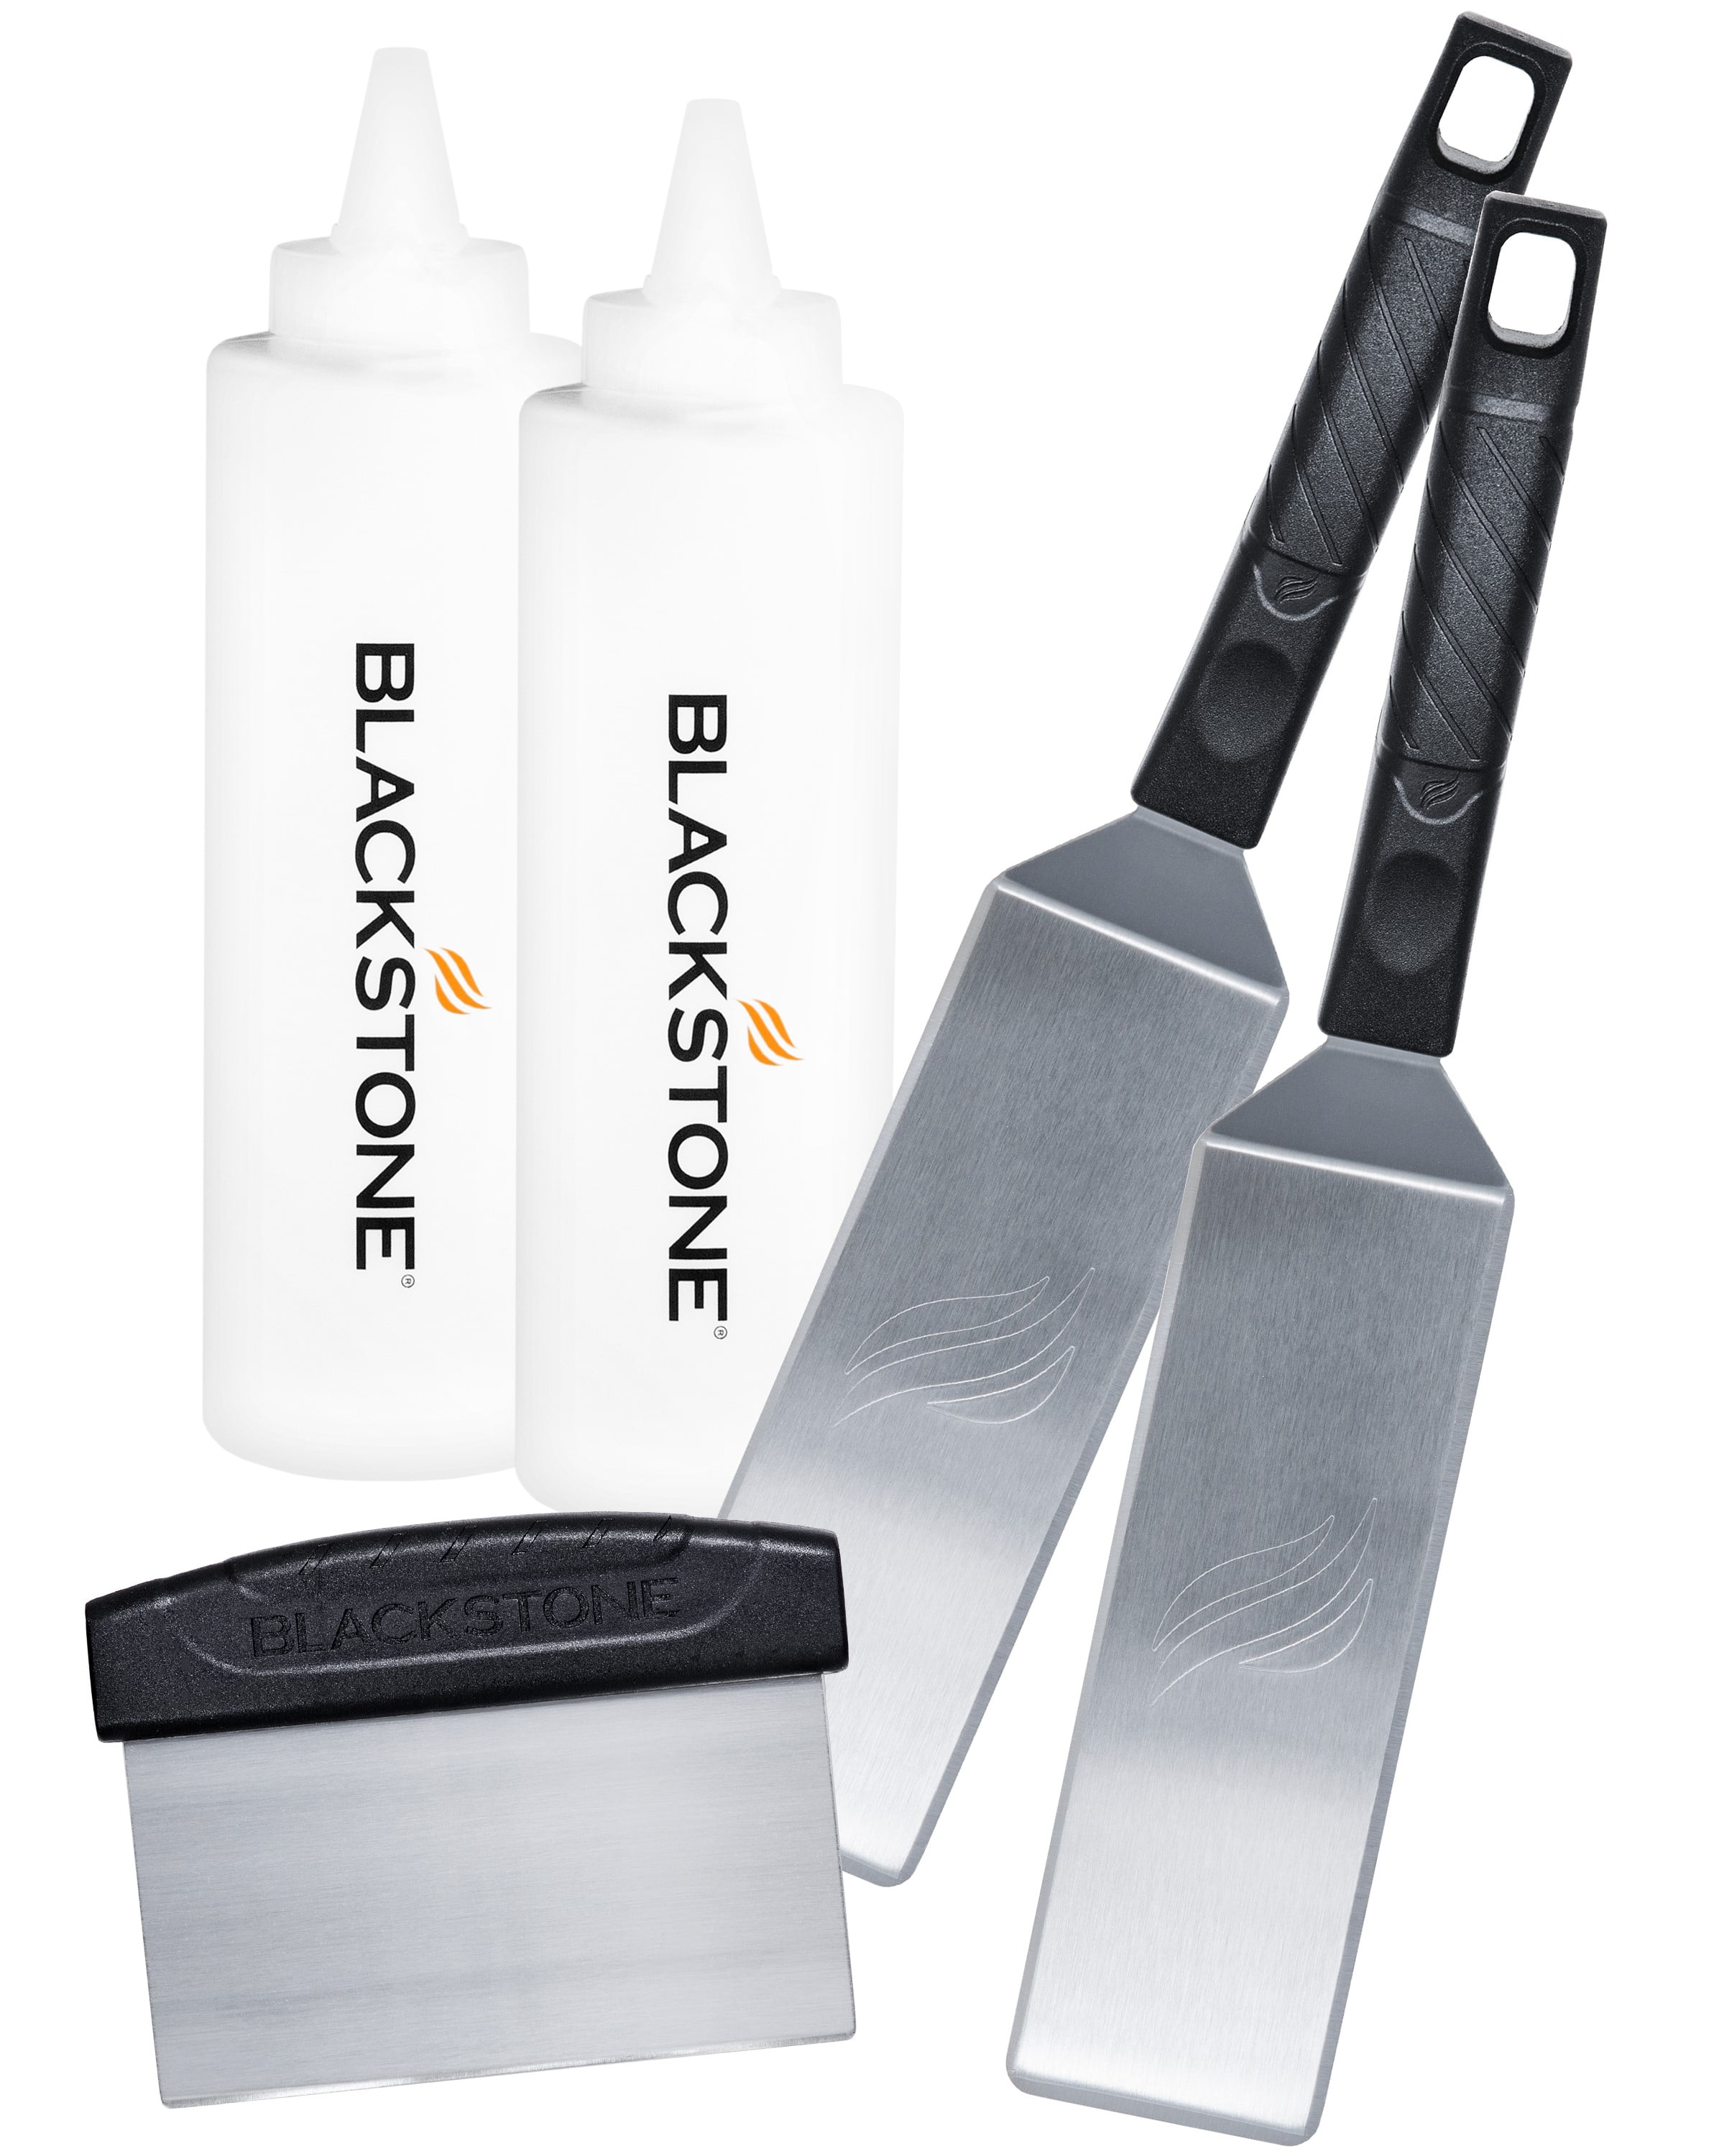  Blackstone 5433 Knife Roll Kit 1 Silicone Prep Mat, Integrated  Salt and Pepper Shaker, 1 Large Prep Knife, 1 Small Prep Knife, 1  Containment Tube, Stainless Steel, Chef Travel Roll